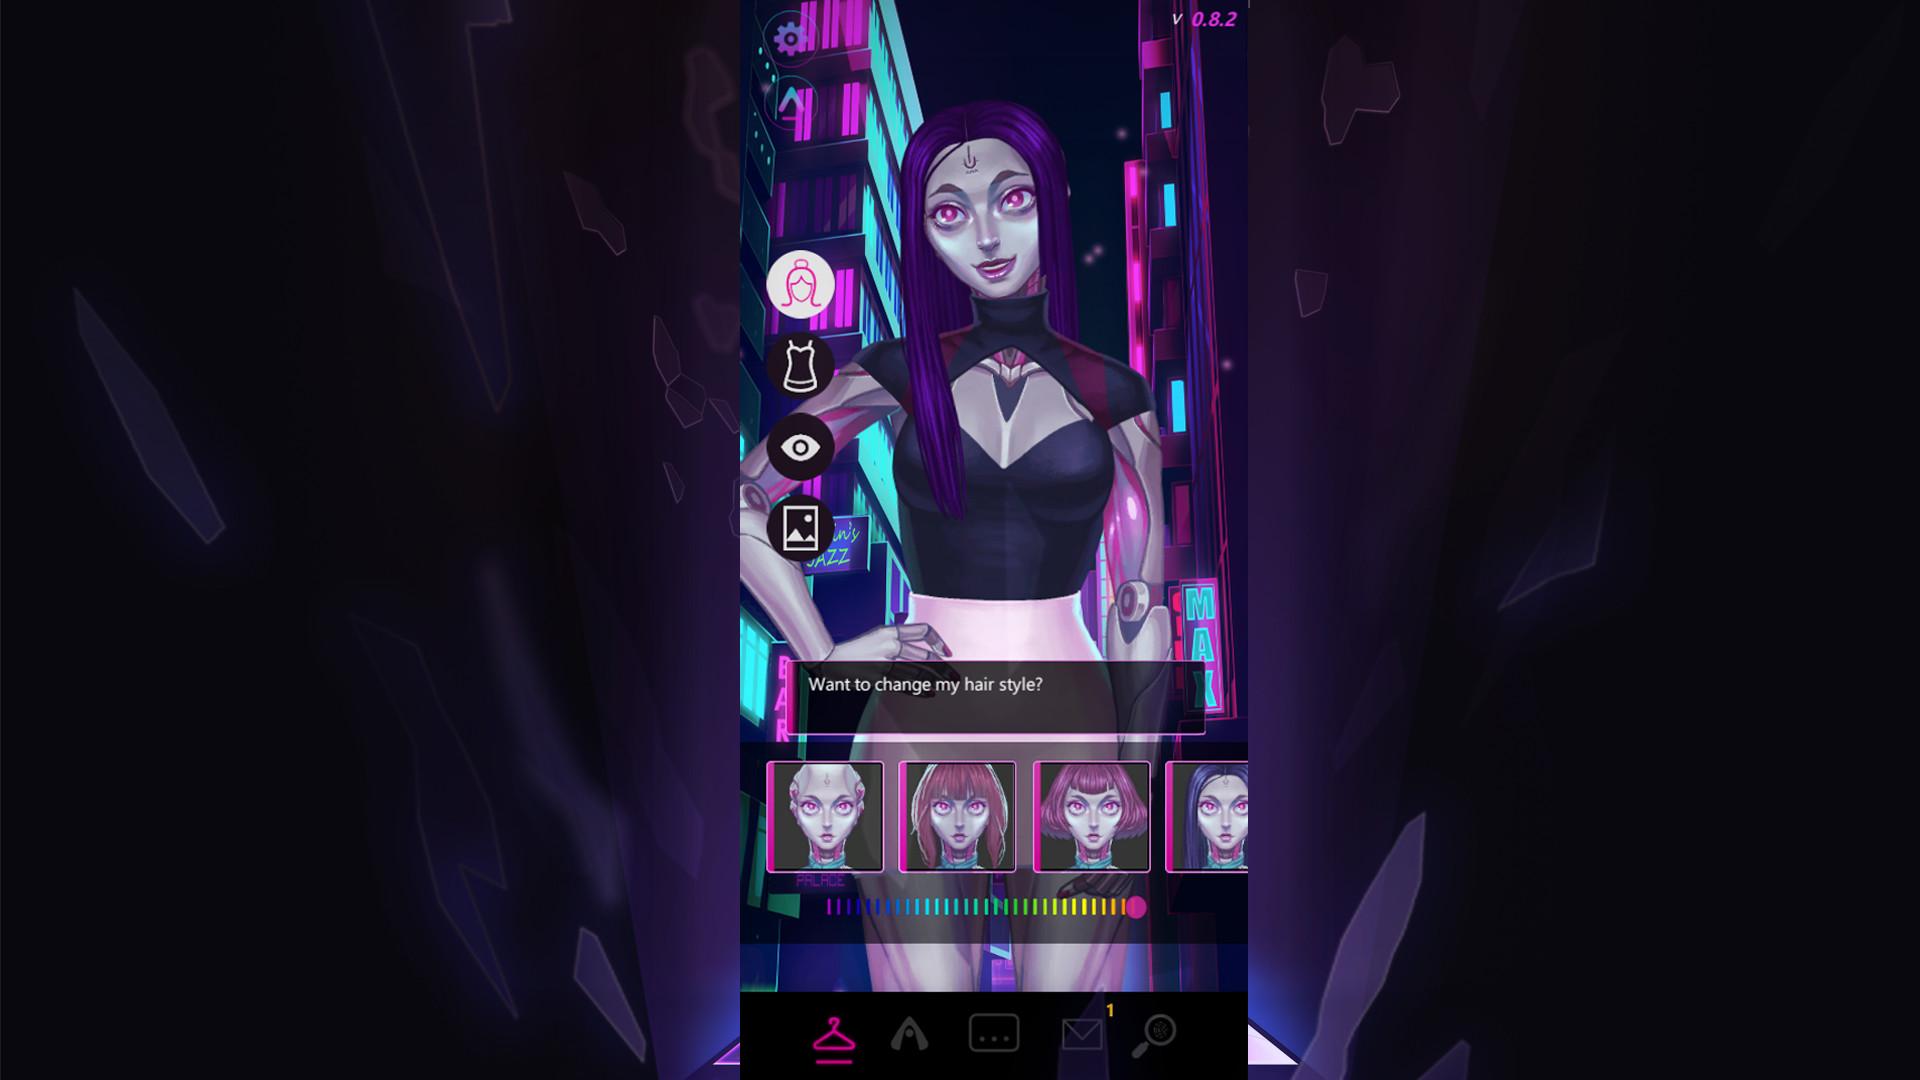 Acolyte - an ai assistant stands in the middle of the screen, ready to be customized by the player